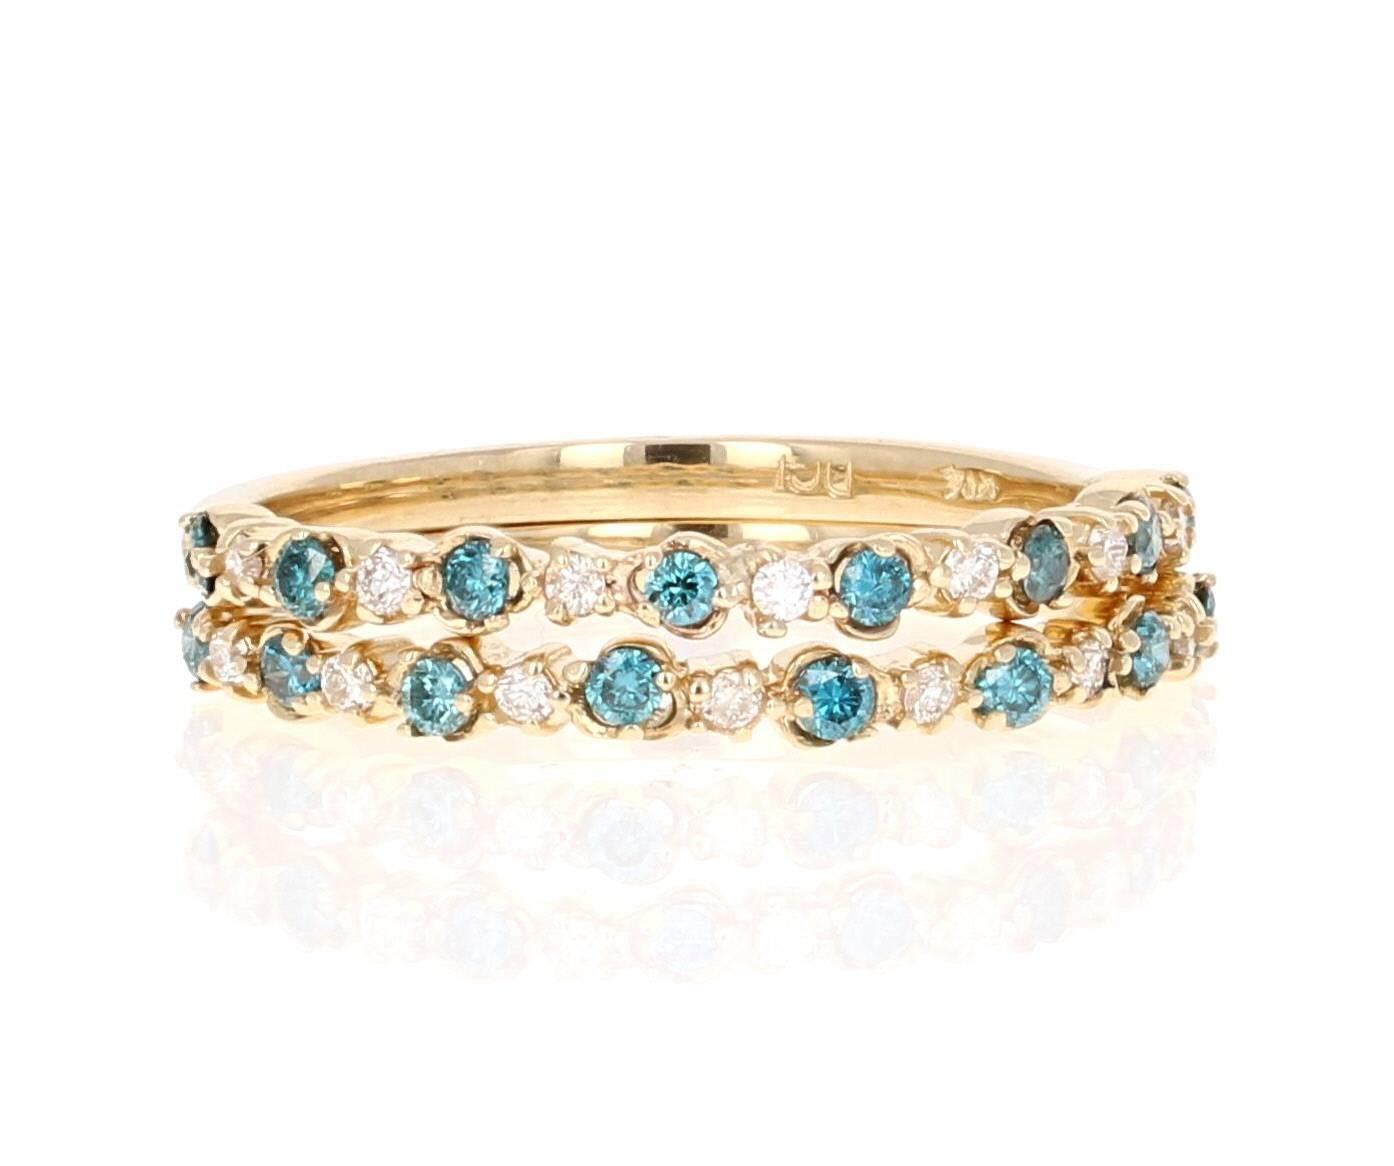 Cute and dainty stackable bands!  These pretty blue and white diamond bands come in a set of 2 - keep 1 for yourself and gift the other or keep them both and stack them up on a finger.  
These bands have 16 Blue Round Cut Diamonds that weigh 0.31